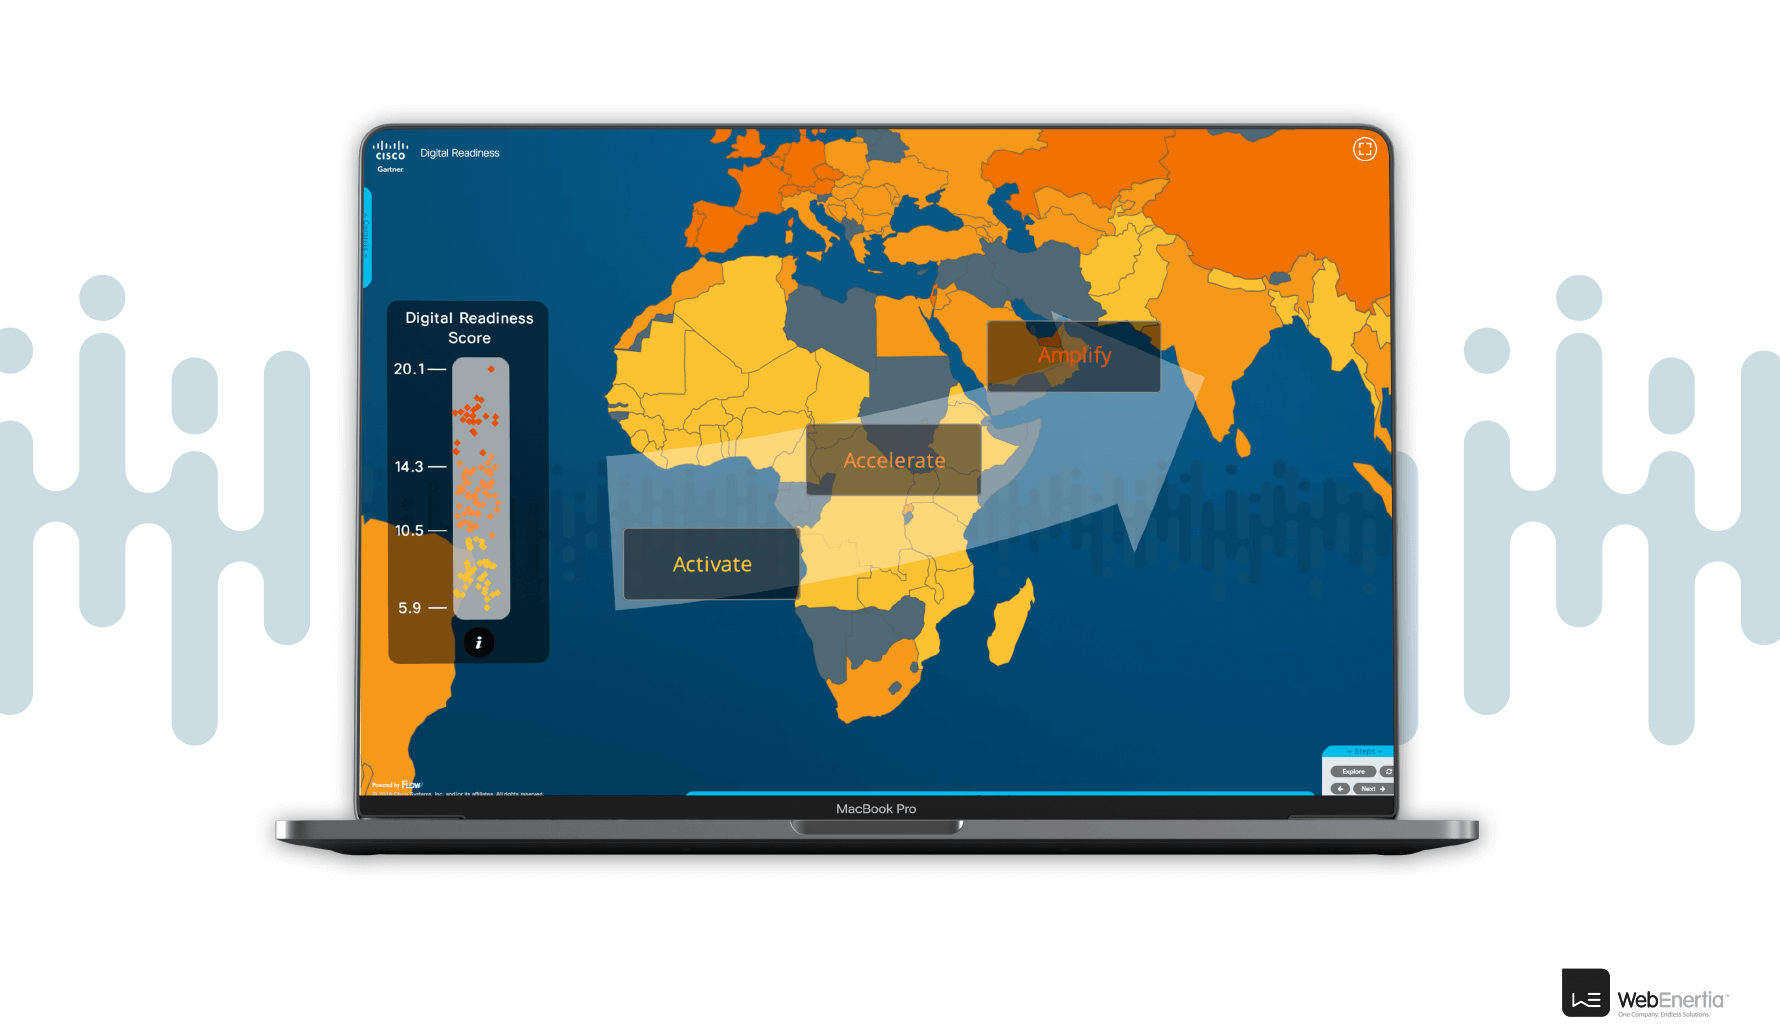 Cisco CSR digital readiness scores color coded map of Africa